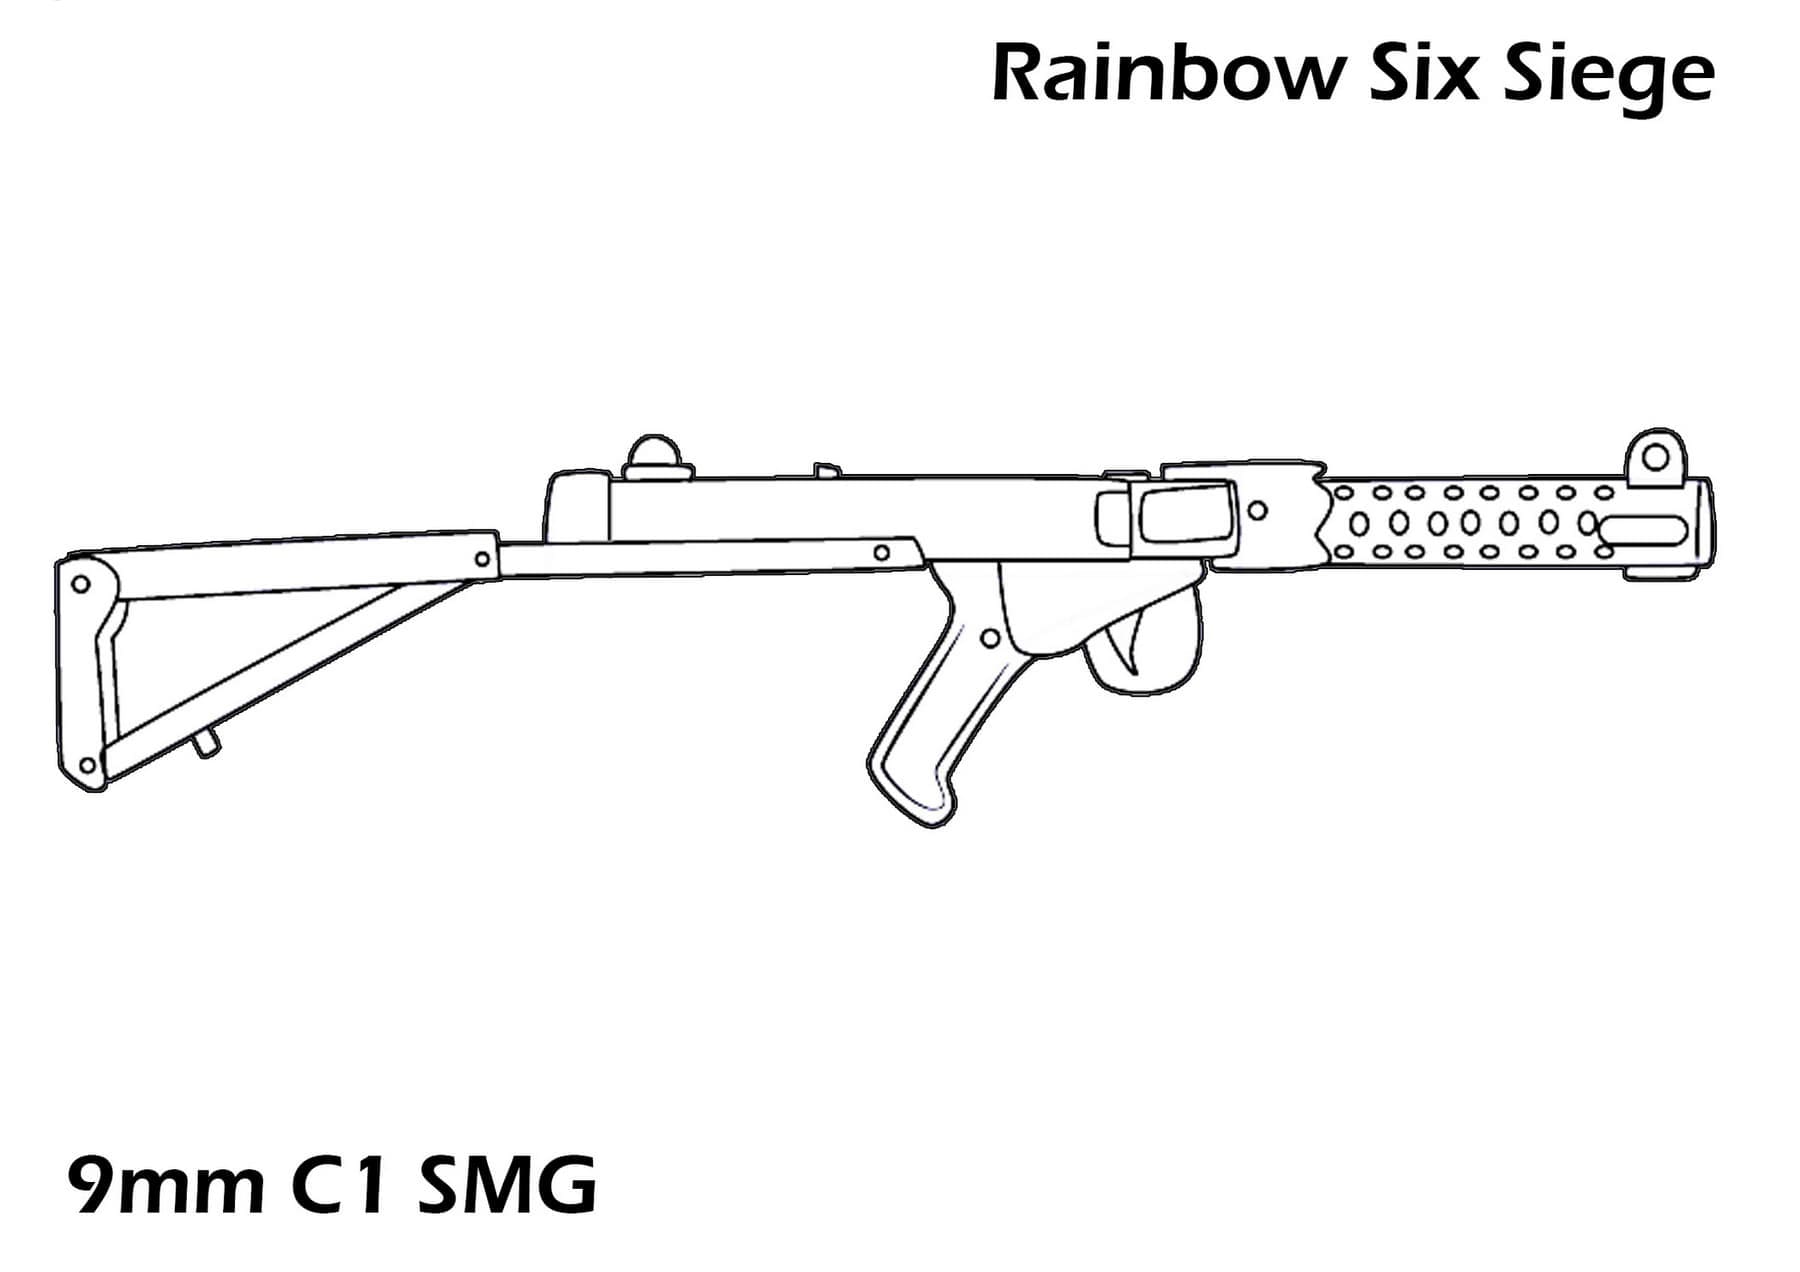 9mm C1 SMG Gun coloring page - Download, Print or Color Online for Free